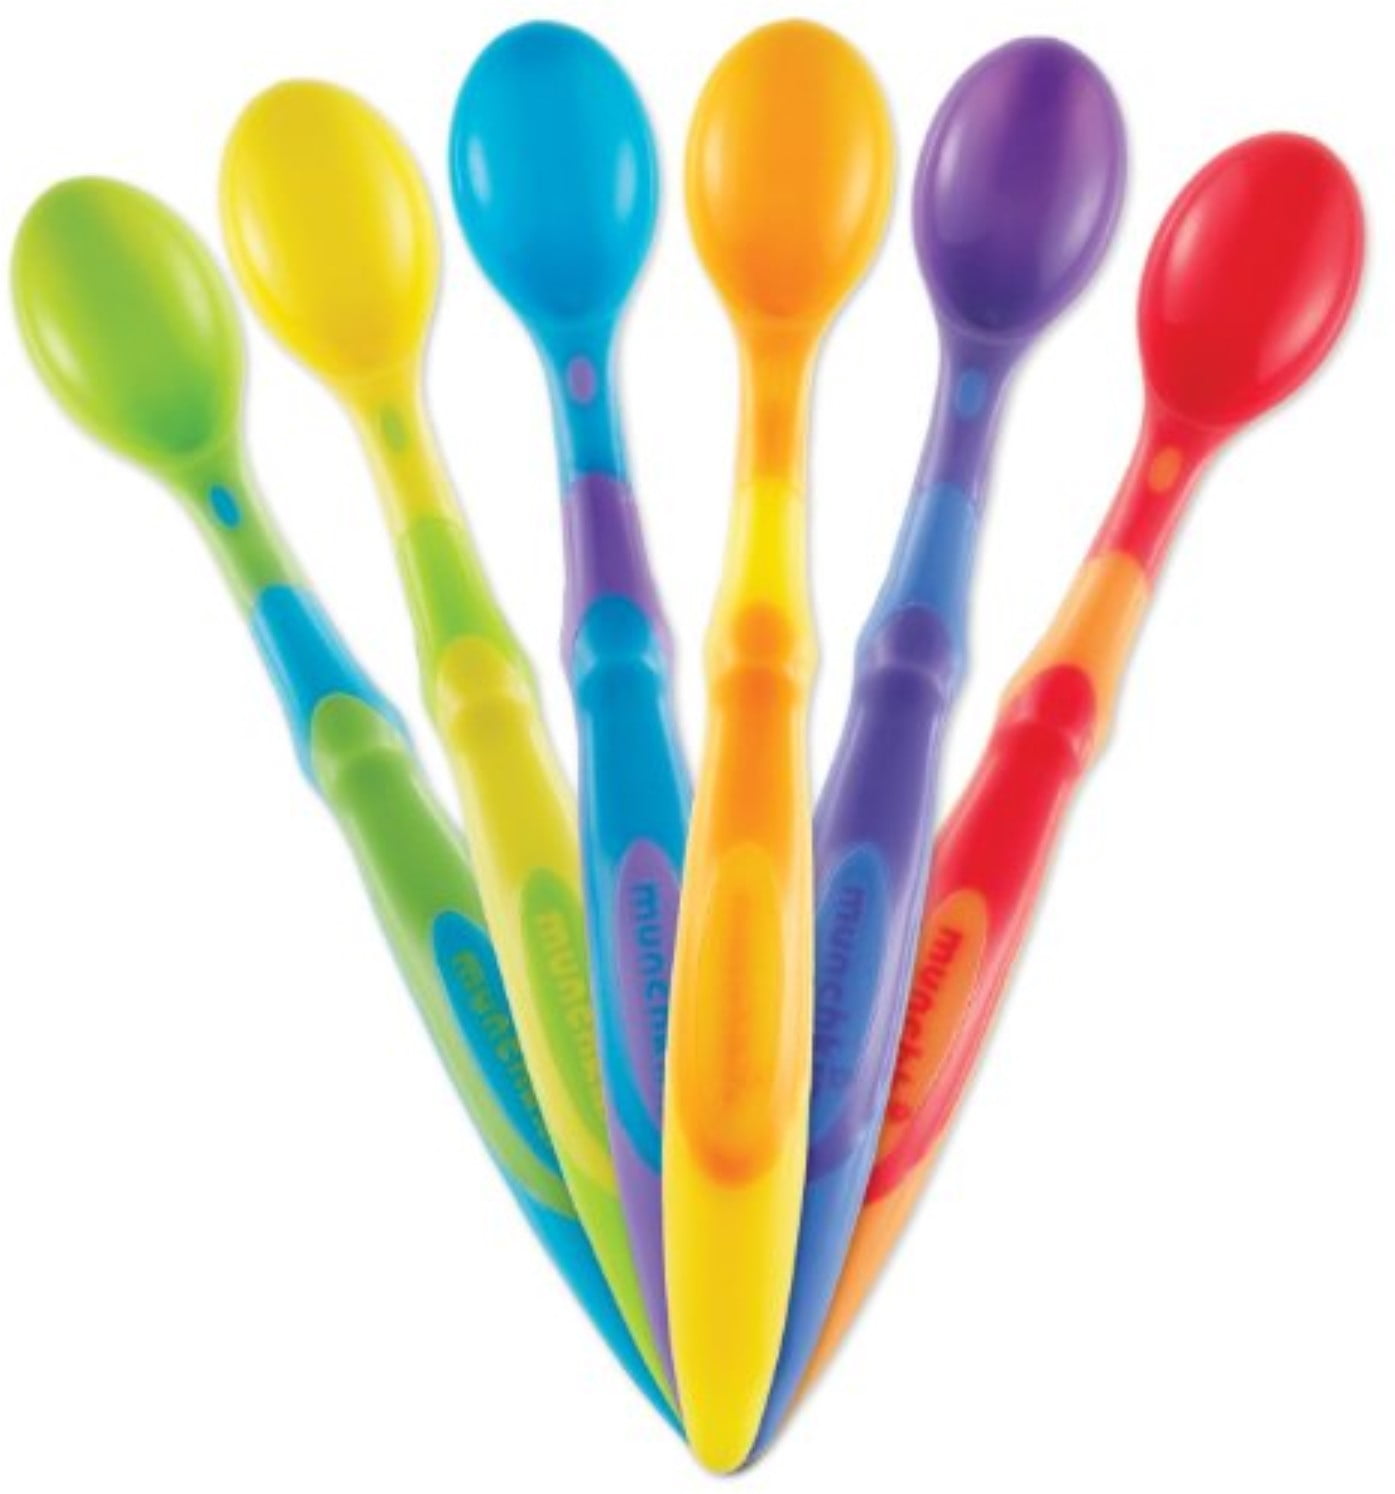 Munchkin Stay Put Suction Bowl 3 Pack with Soft-Tip Infant Spoons 12 Pack 